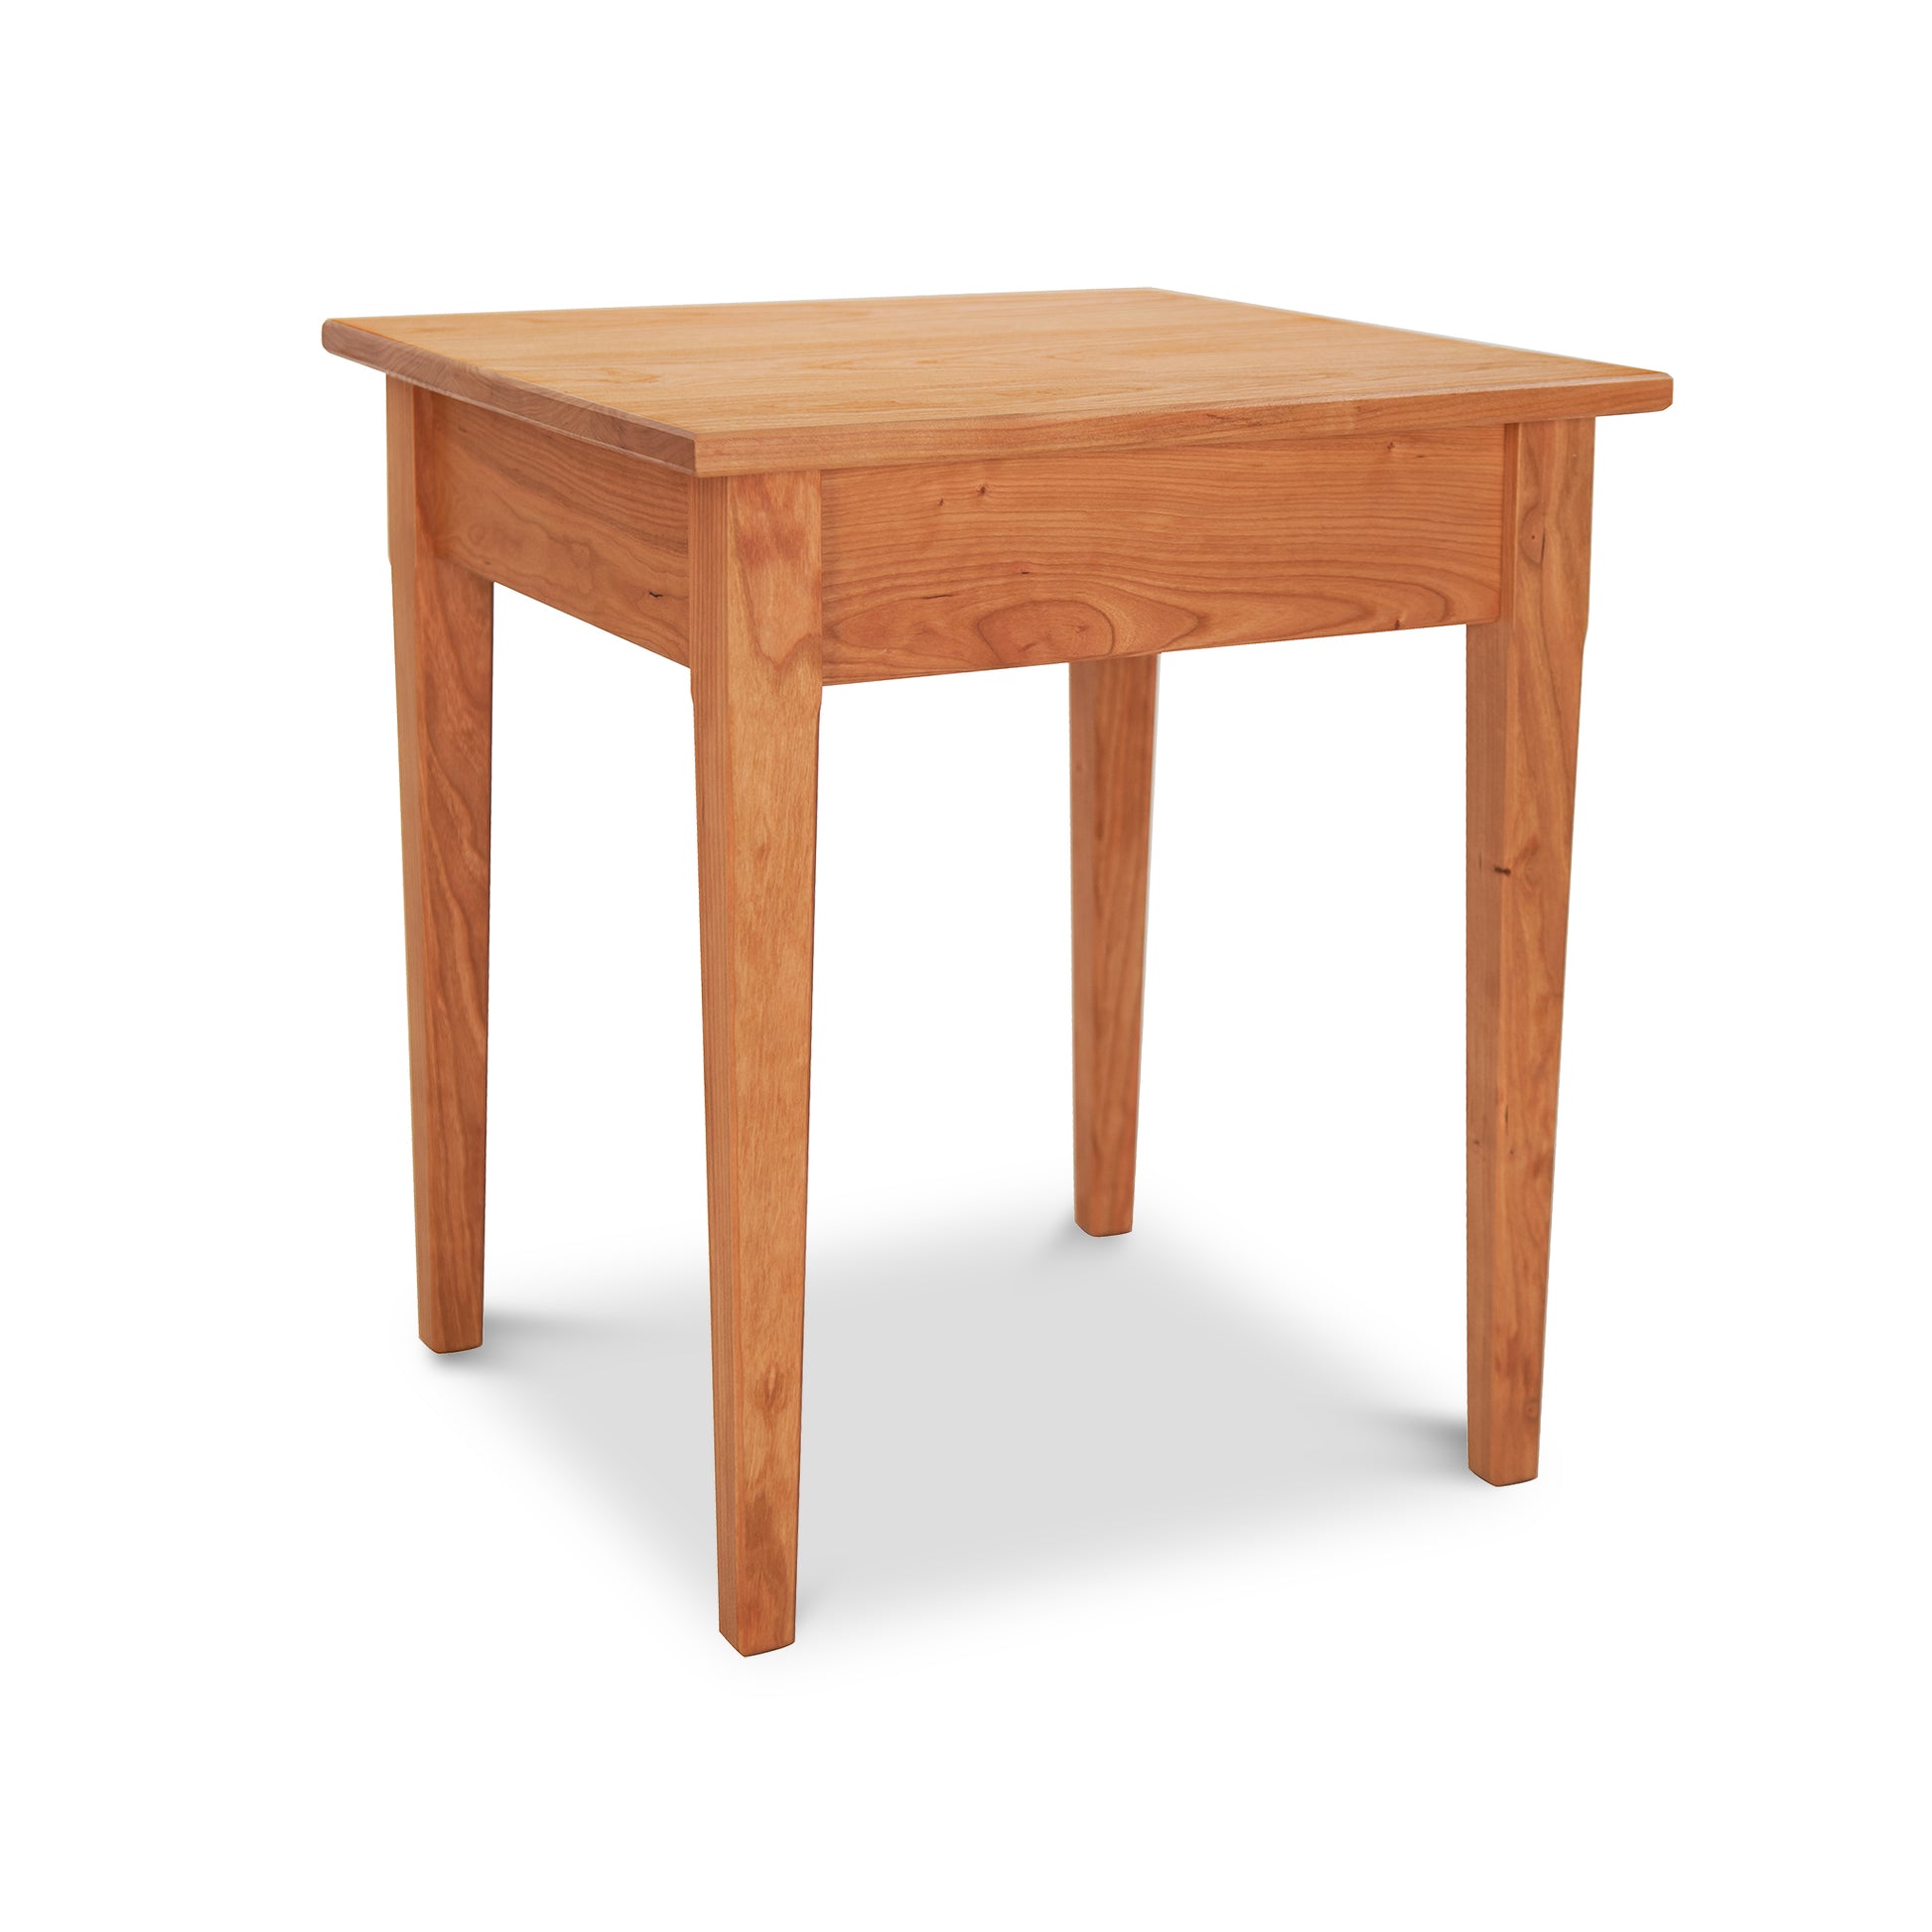 A simple Vermont Shaker End Table from Maple Corner Woodworks with a smooth rectangular top and four sturdy legs, isolated on a white background.